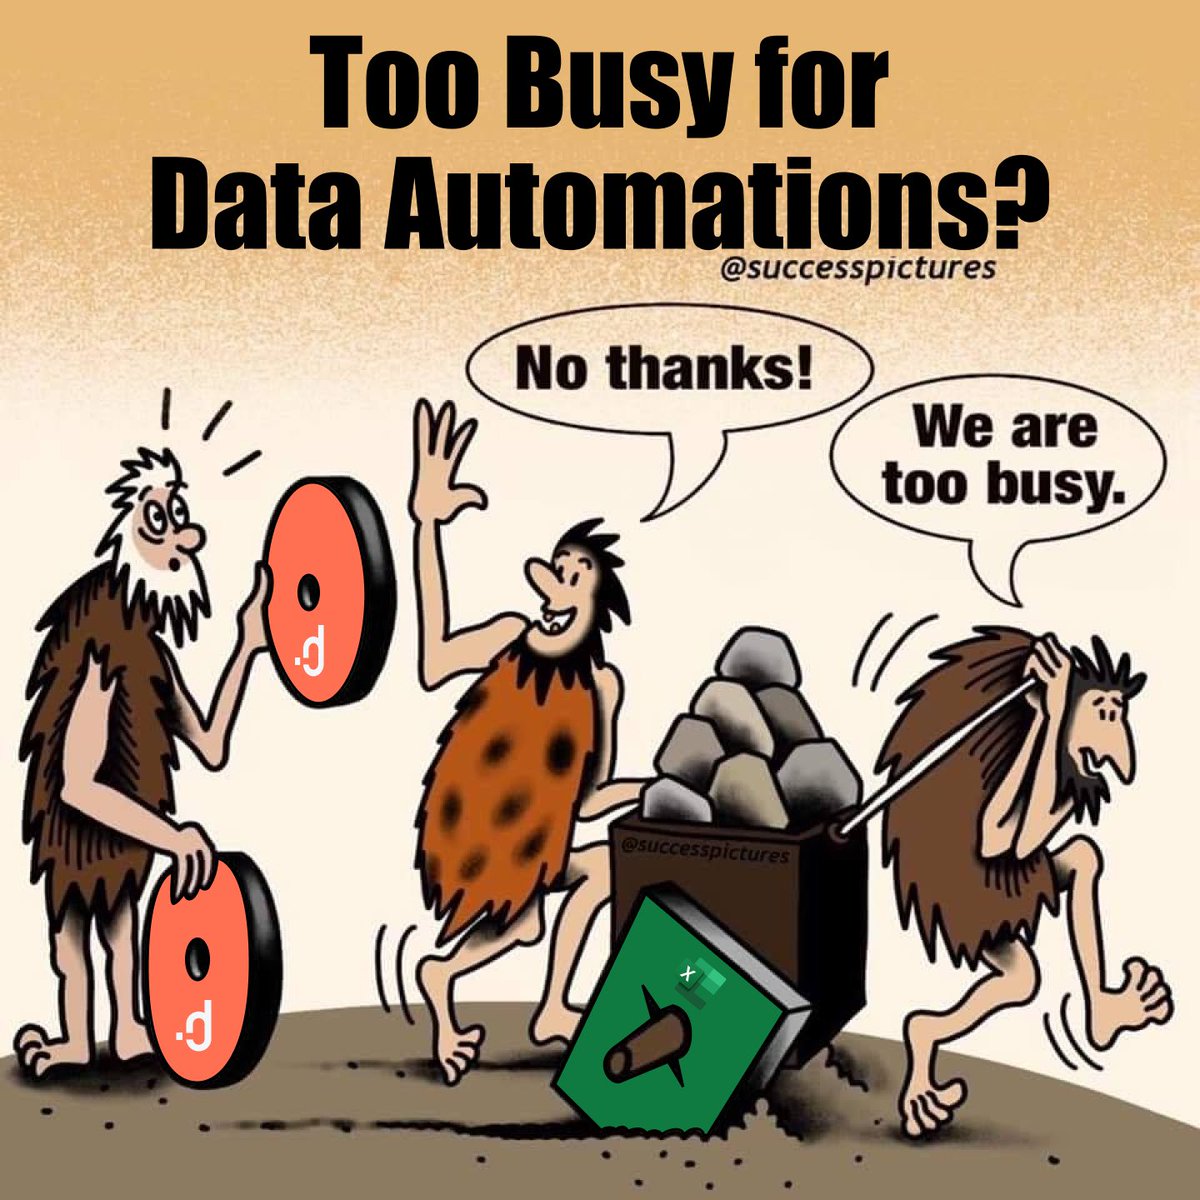 Have a great Friday and automate your data😄
#datuum #datahumor #dataintegration